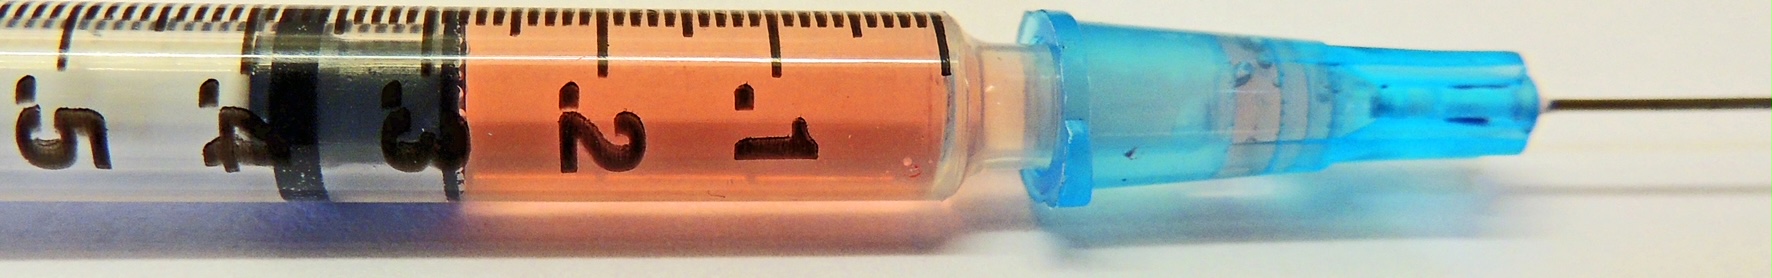 Figure 1. The usual withdrawal of 0.30 mL of fluid (red wine in this illustration) into a standard 25 g 1.5 inch syringe/needle leaves 0.08 mL in the dead space of the needle housing.